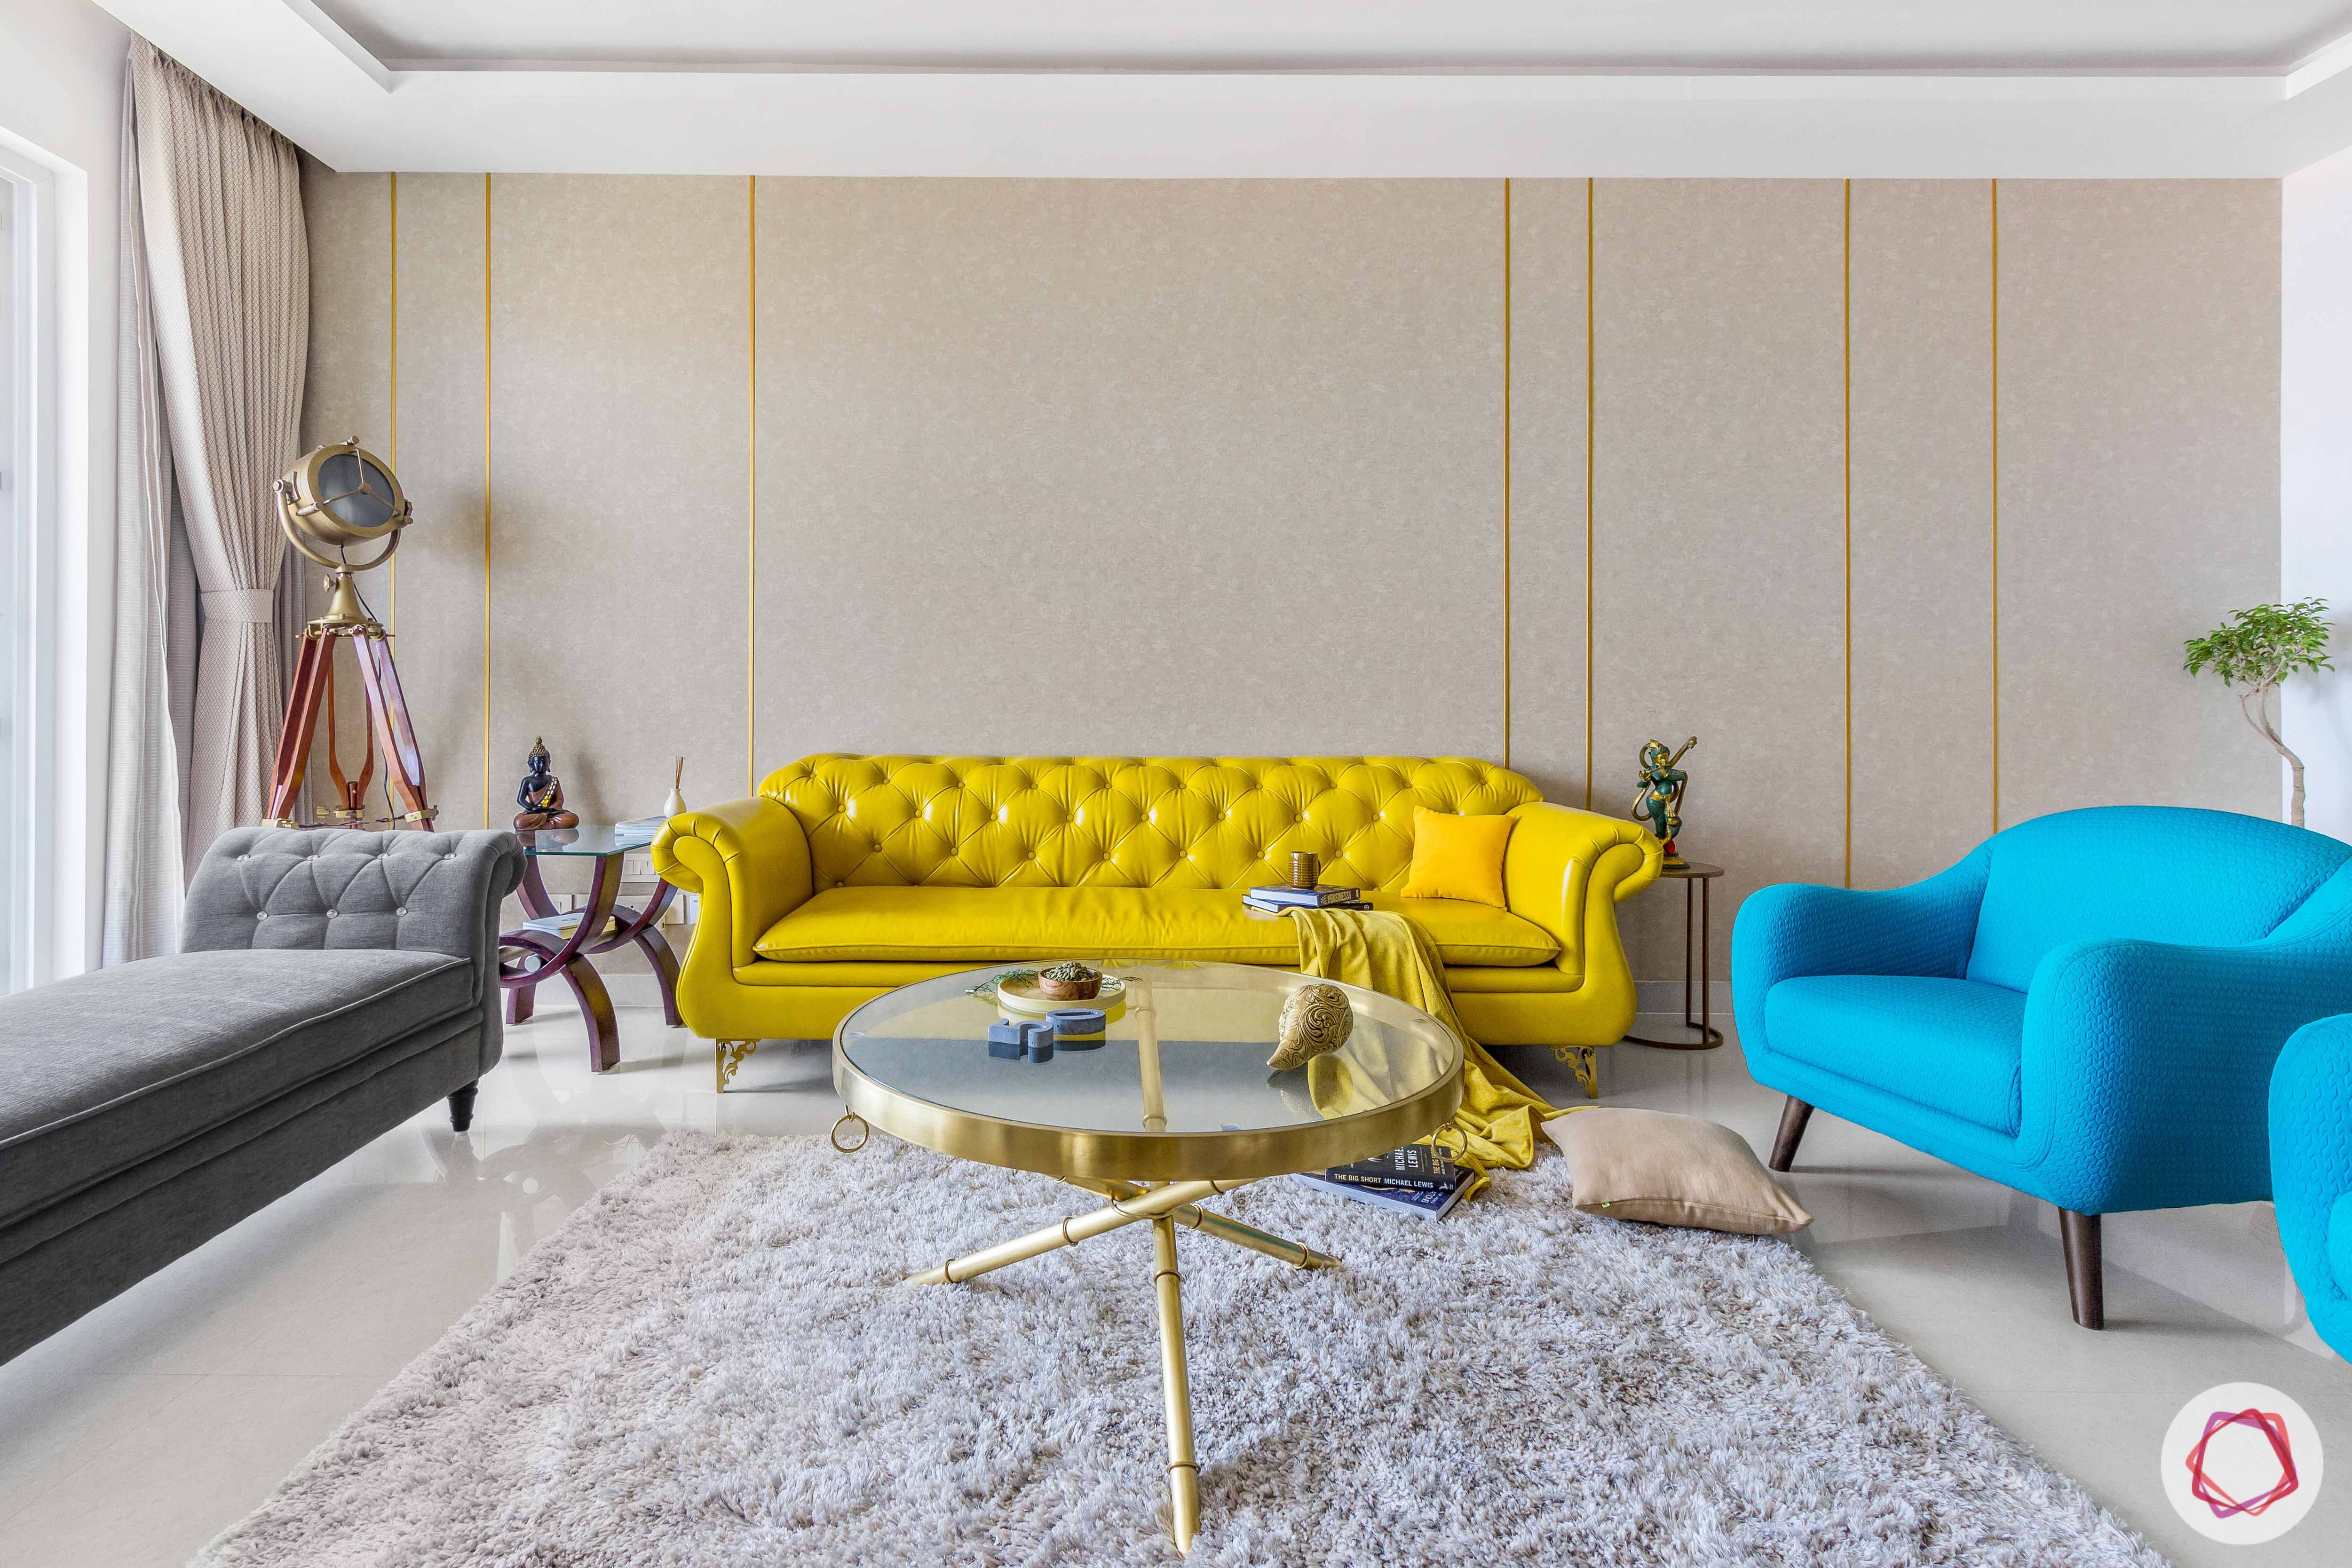 yellow sofa trend: 7 ways to style it &amp; work it in home decor